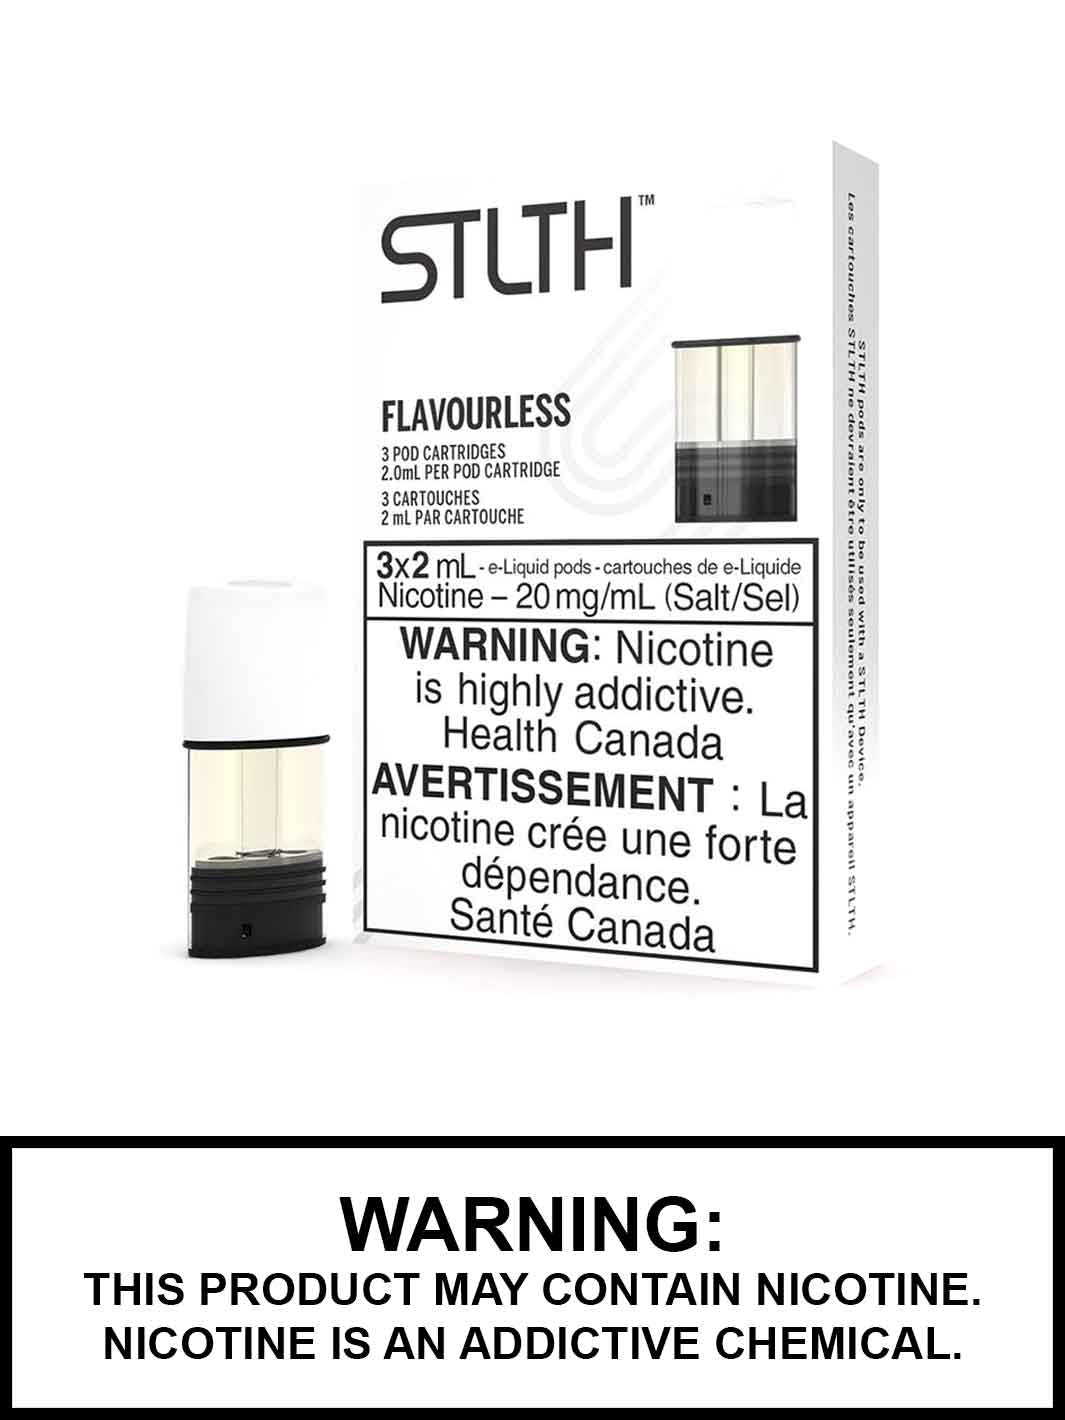 Flavourless STLTH Pods Canada, Flavourless eJuice, Vape360